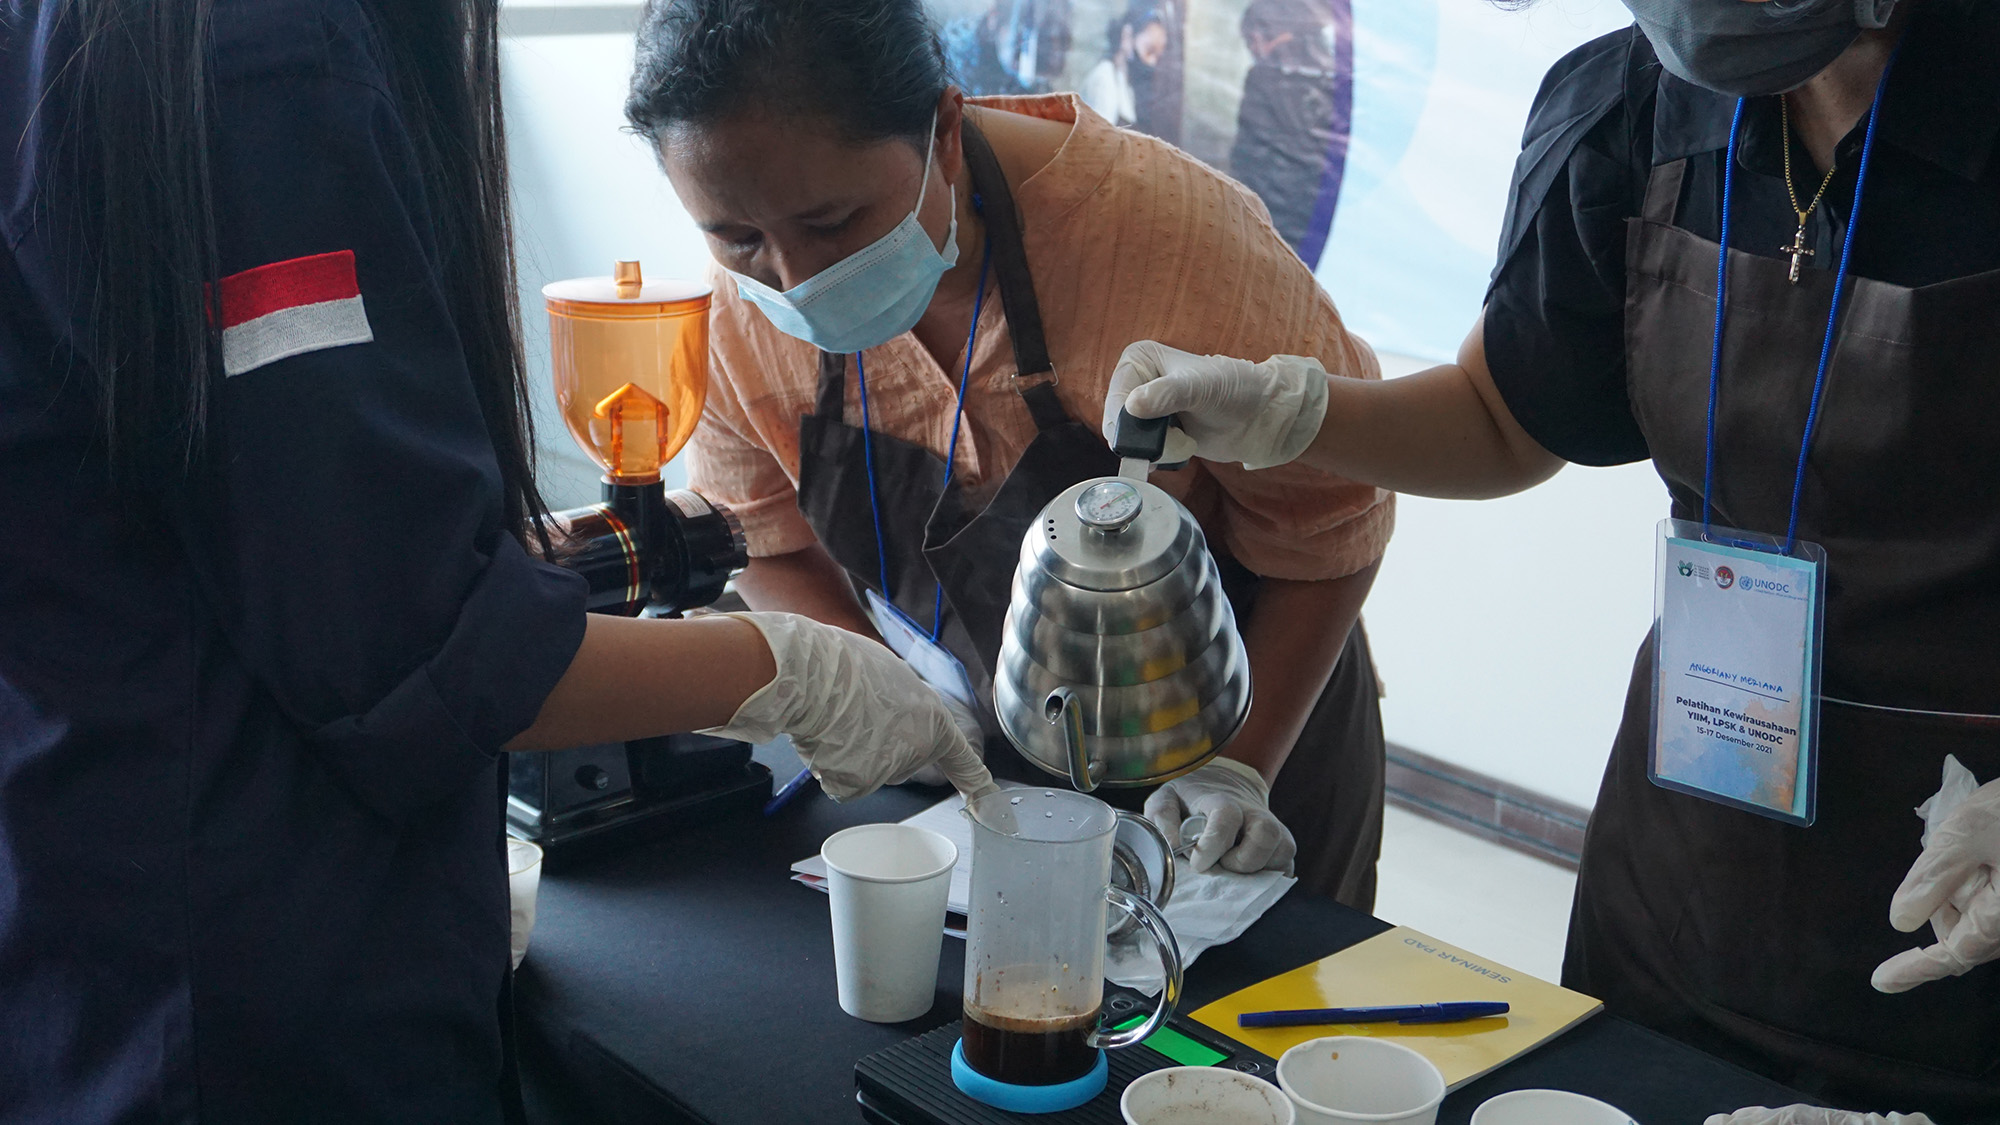 One of the vocational trainings (barista/coffee making) for survivors of terrorism in November 2021